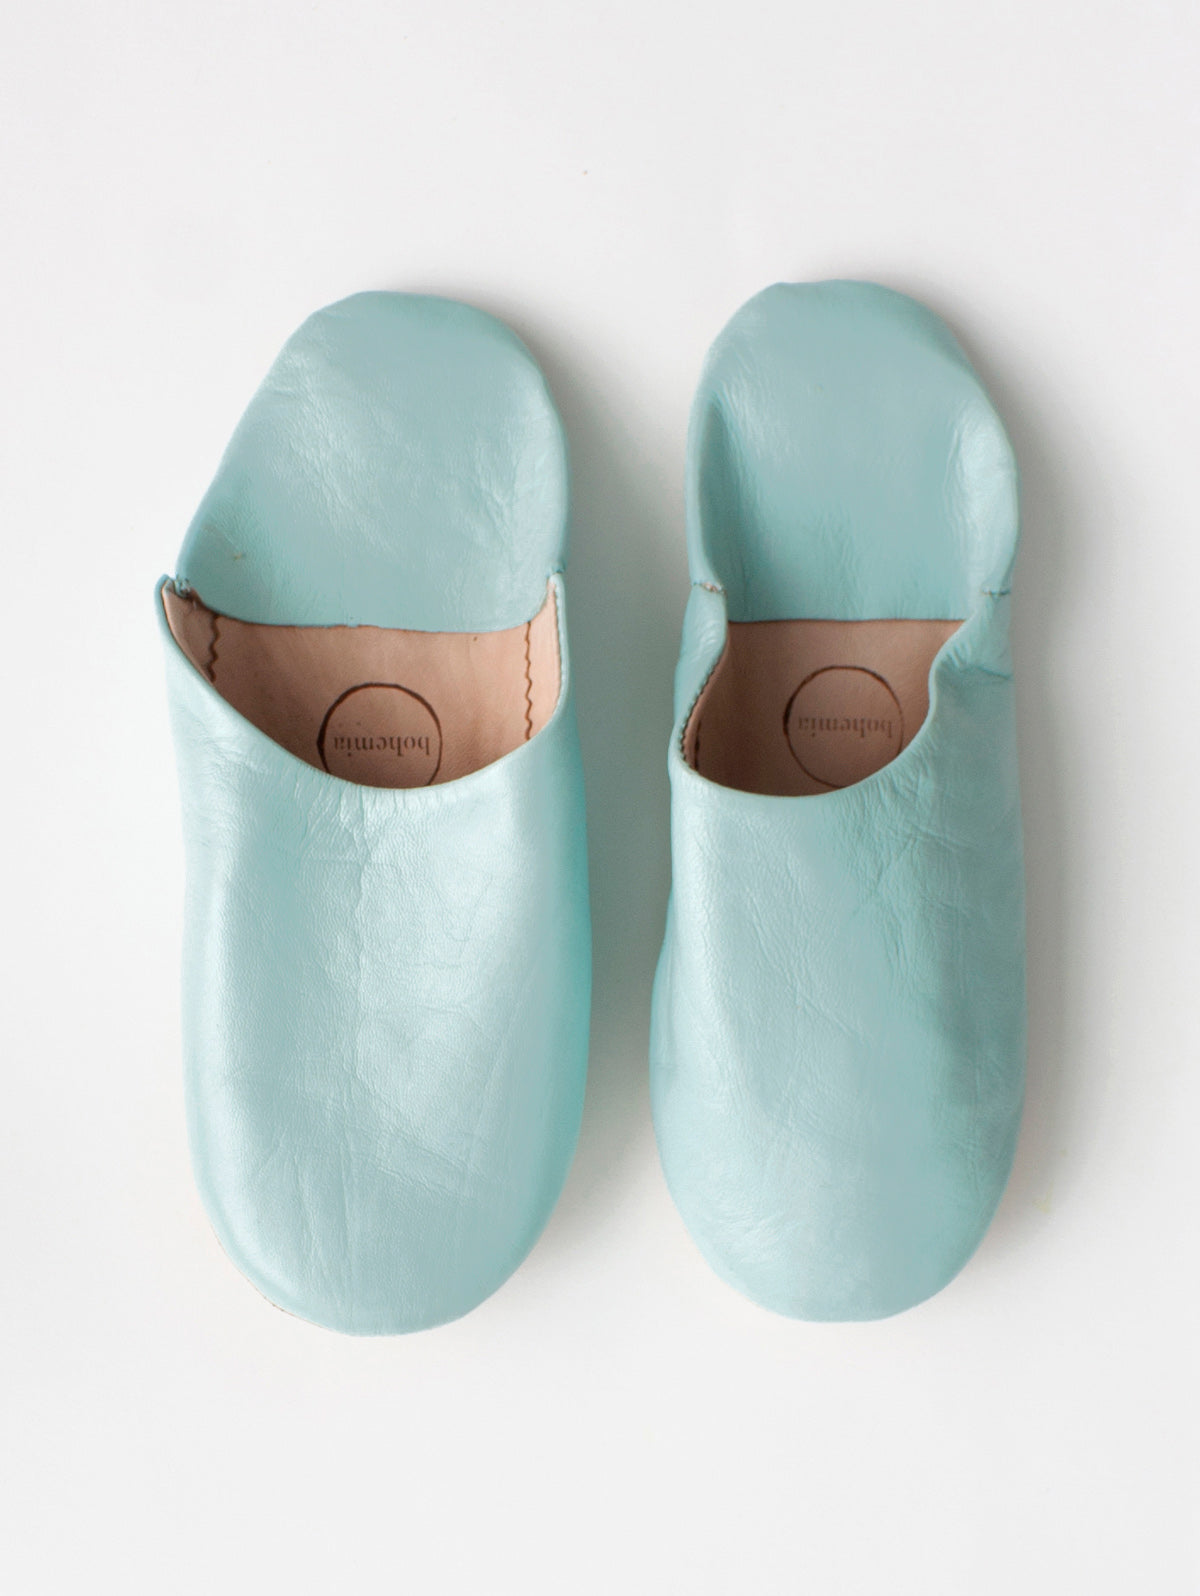 Moroccan Babouche Basic Slippers, Powder Blue